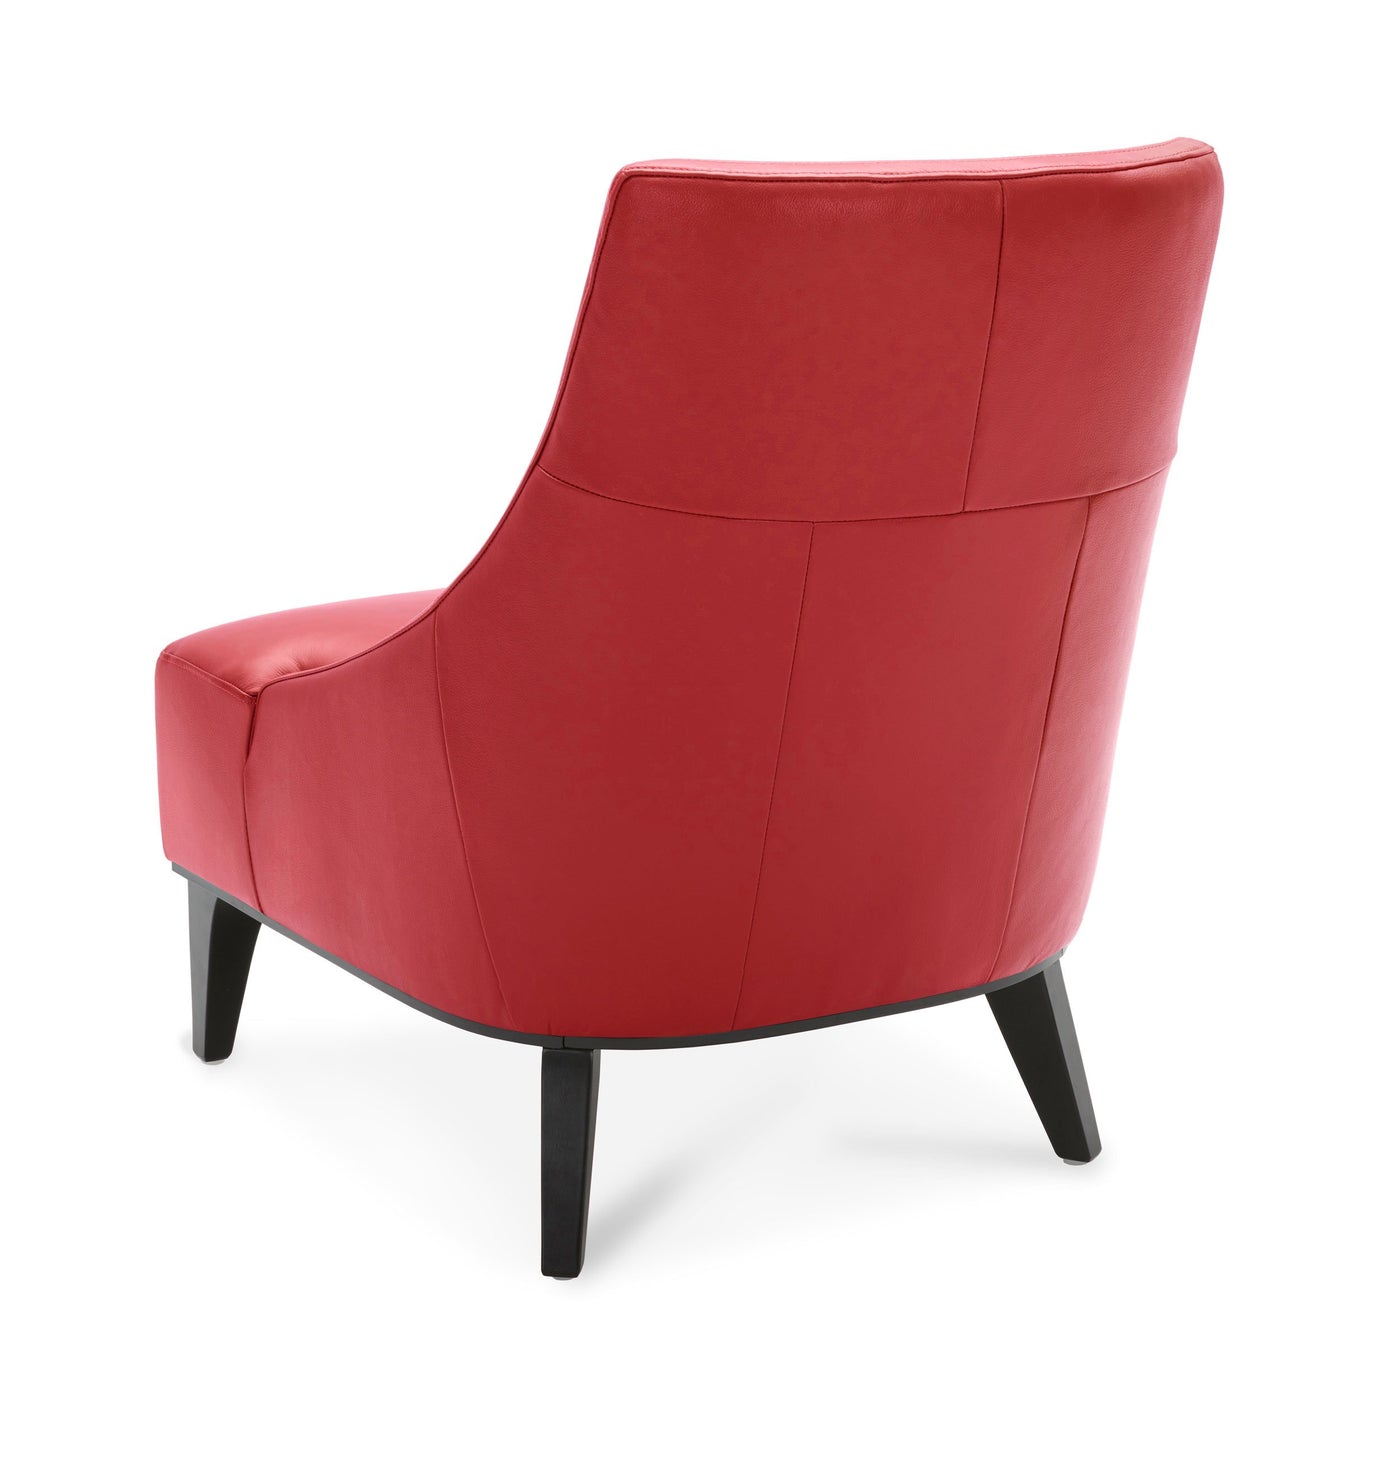 Marquise Leather Slipper Chair - Red